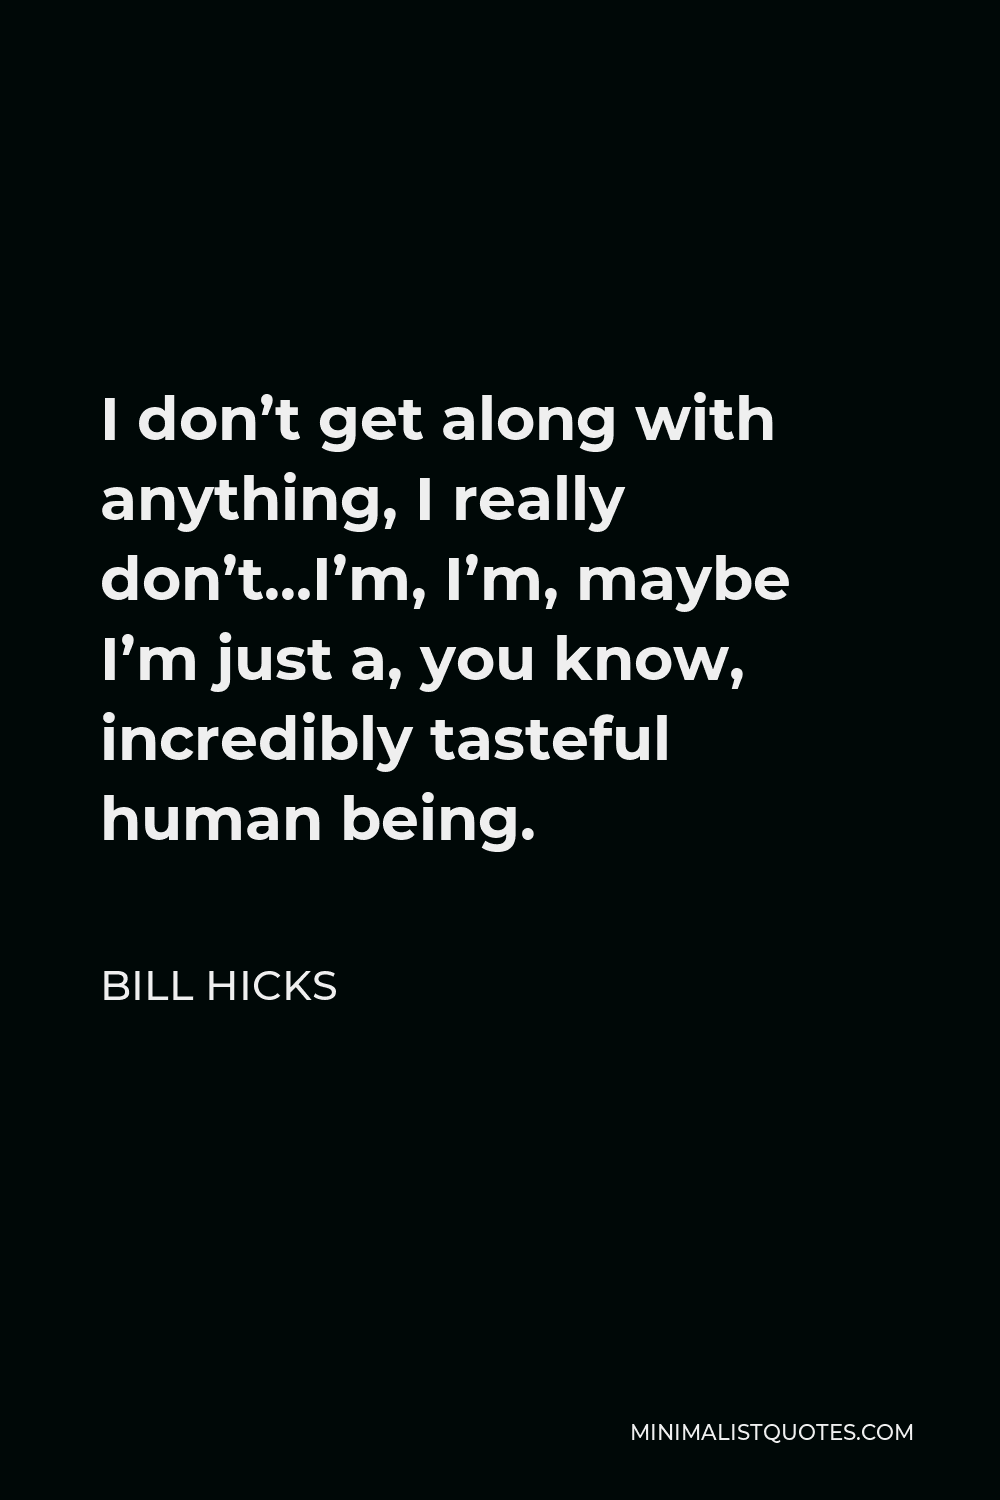 Bill Hicks Quote - I don’t get along with anything, I really don’t…I’m, I’m, maybe I’m just a, you know, incredibly tasteful human being.